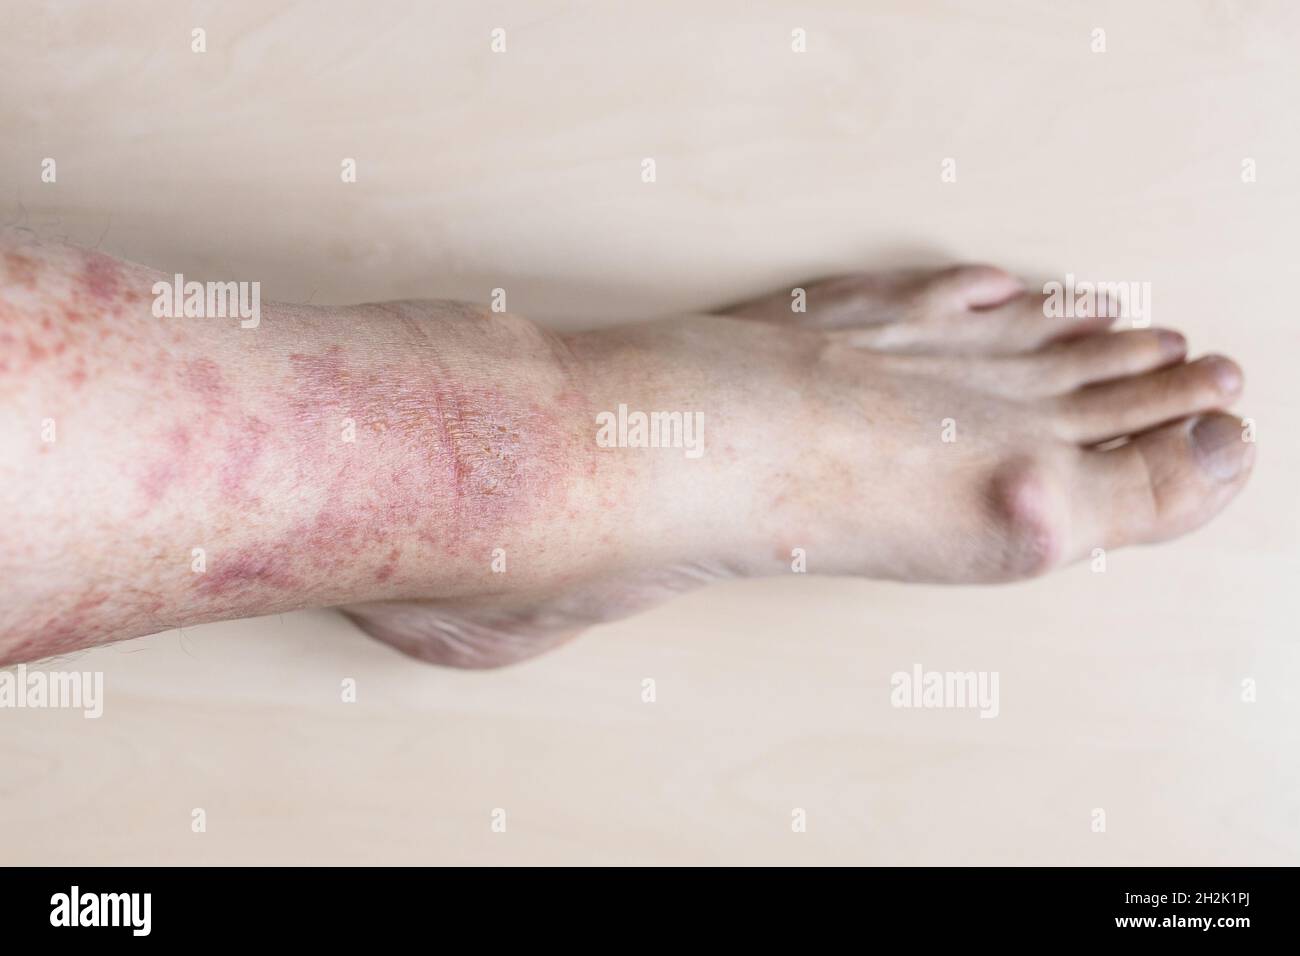 sample of Allergic contact dermatitis - male shin with redness and itchy rash on skin Stock Photo